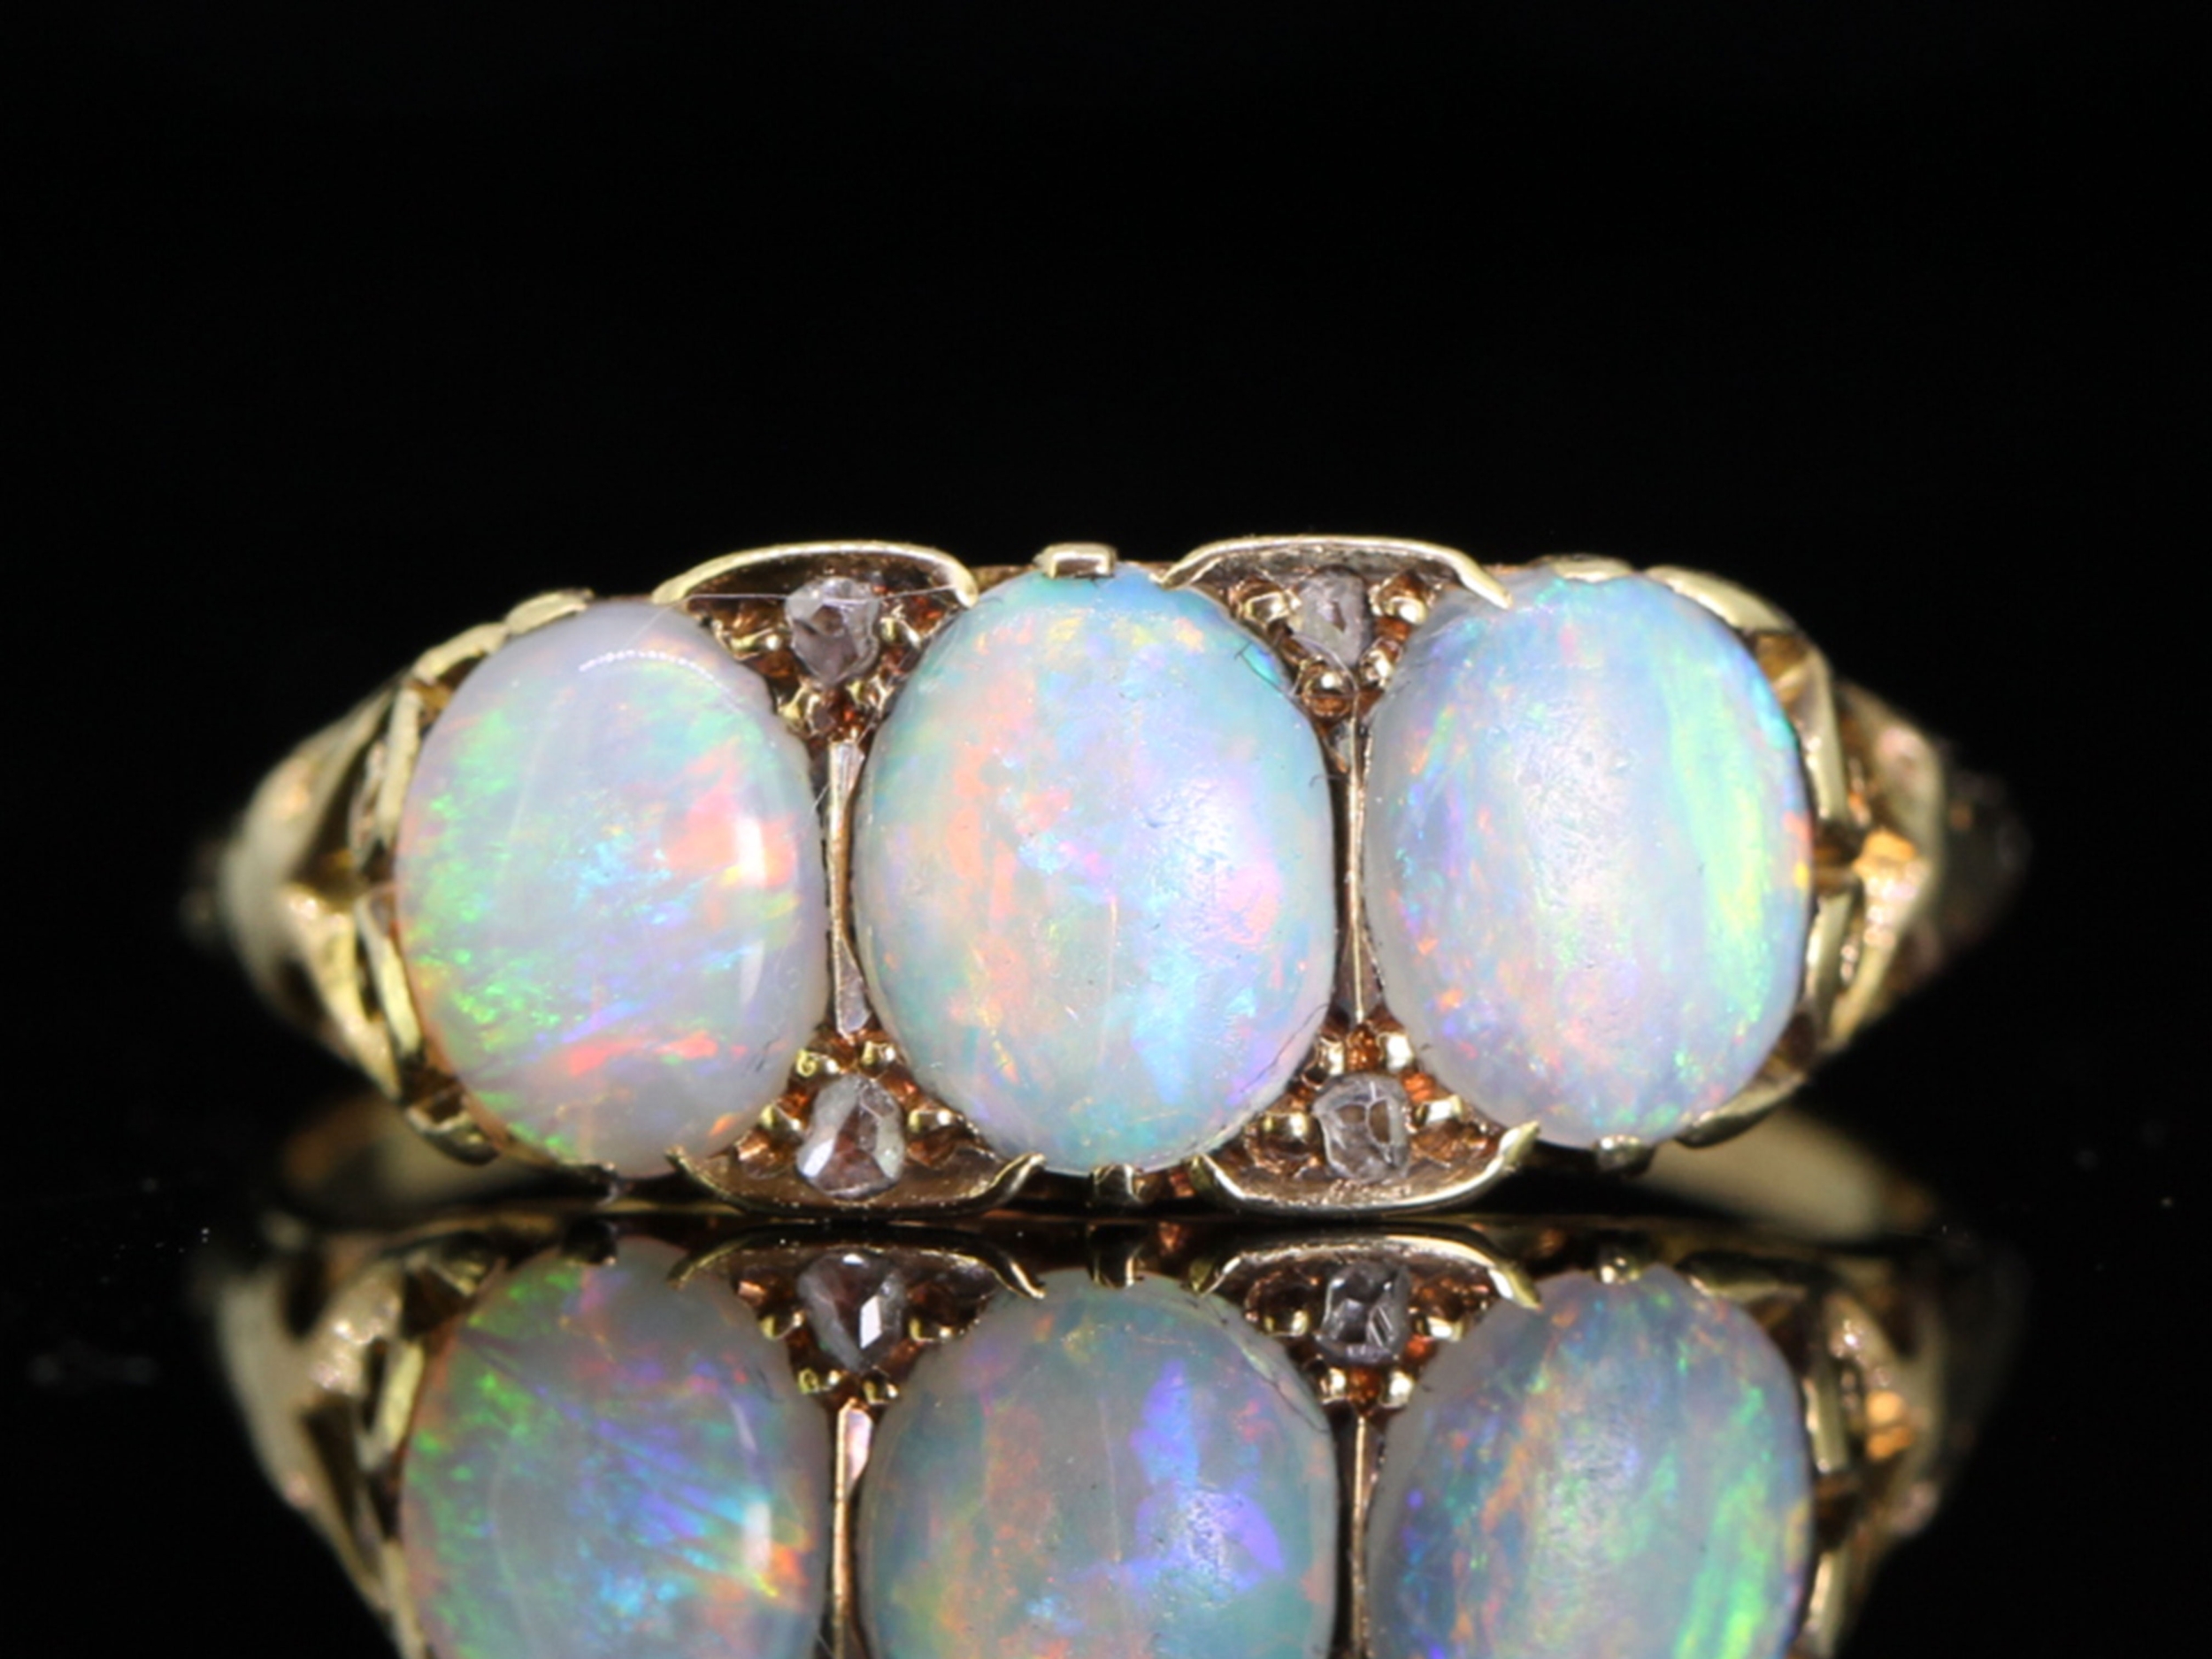 Colourful three stone opal and diamond 18 carat gold ring